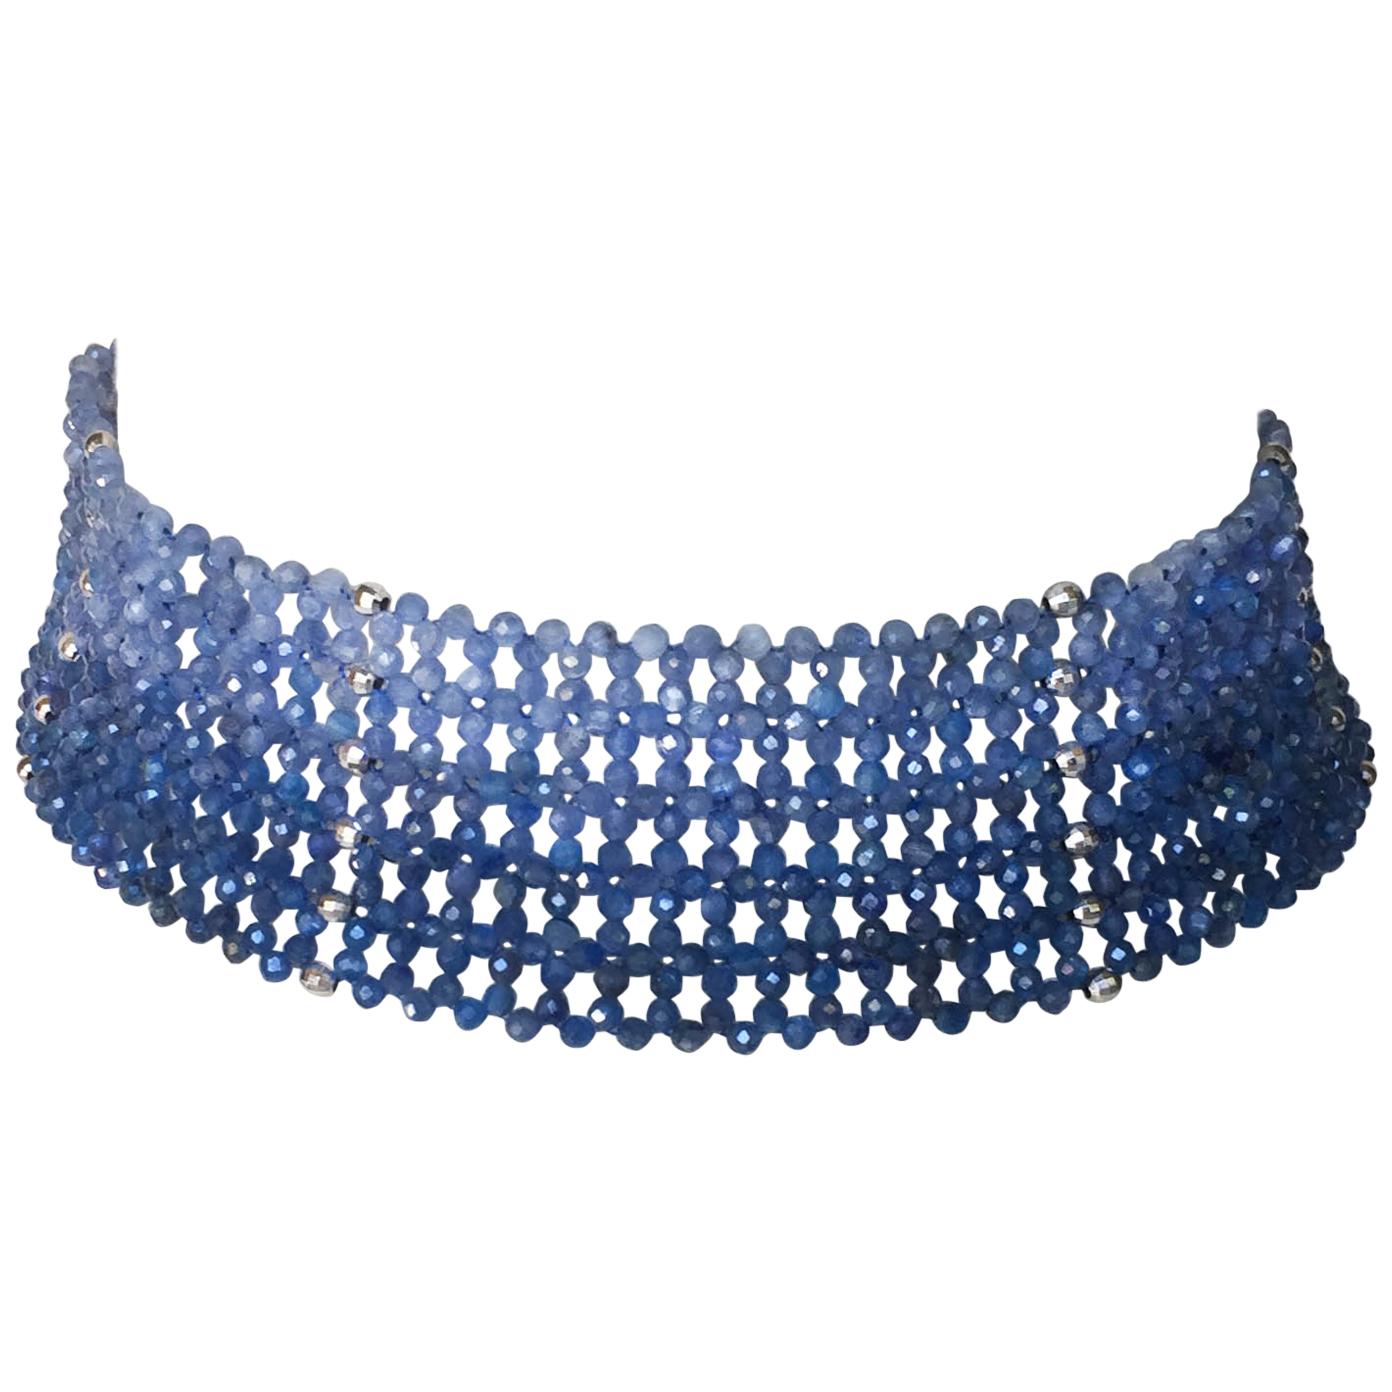 Woven Kyanite Beaded Choker with Sterling Silver Beads and Clasp